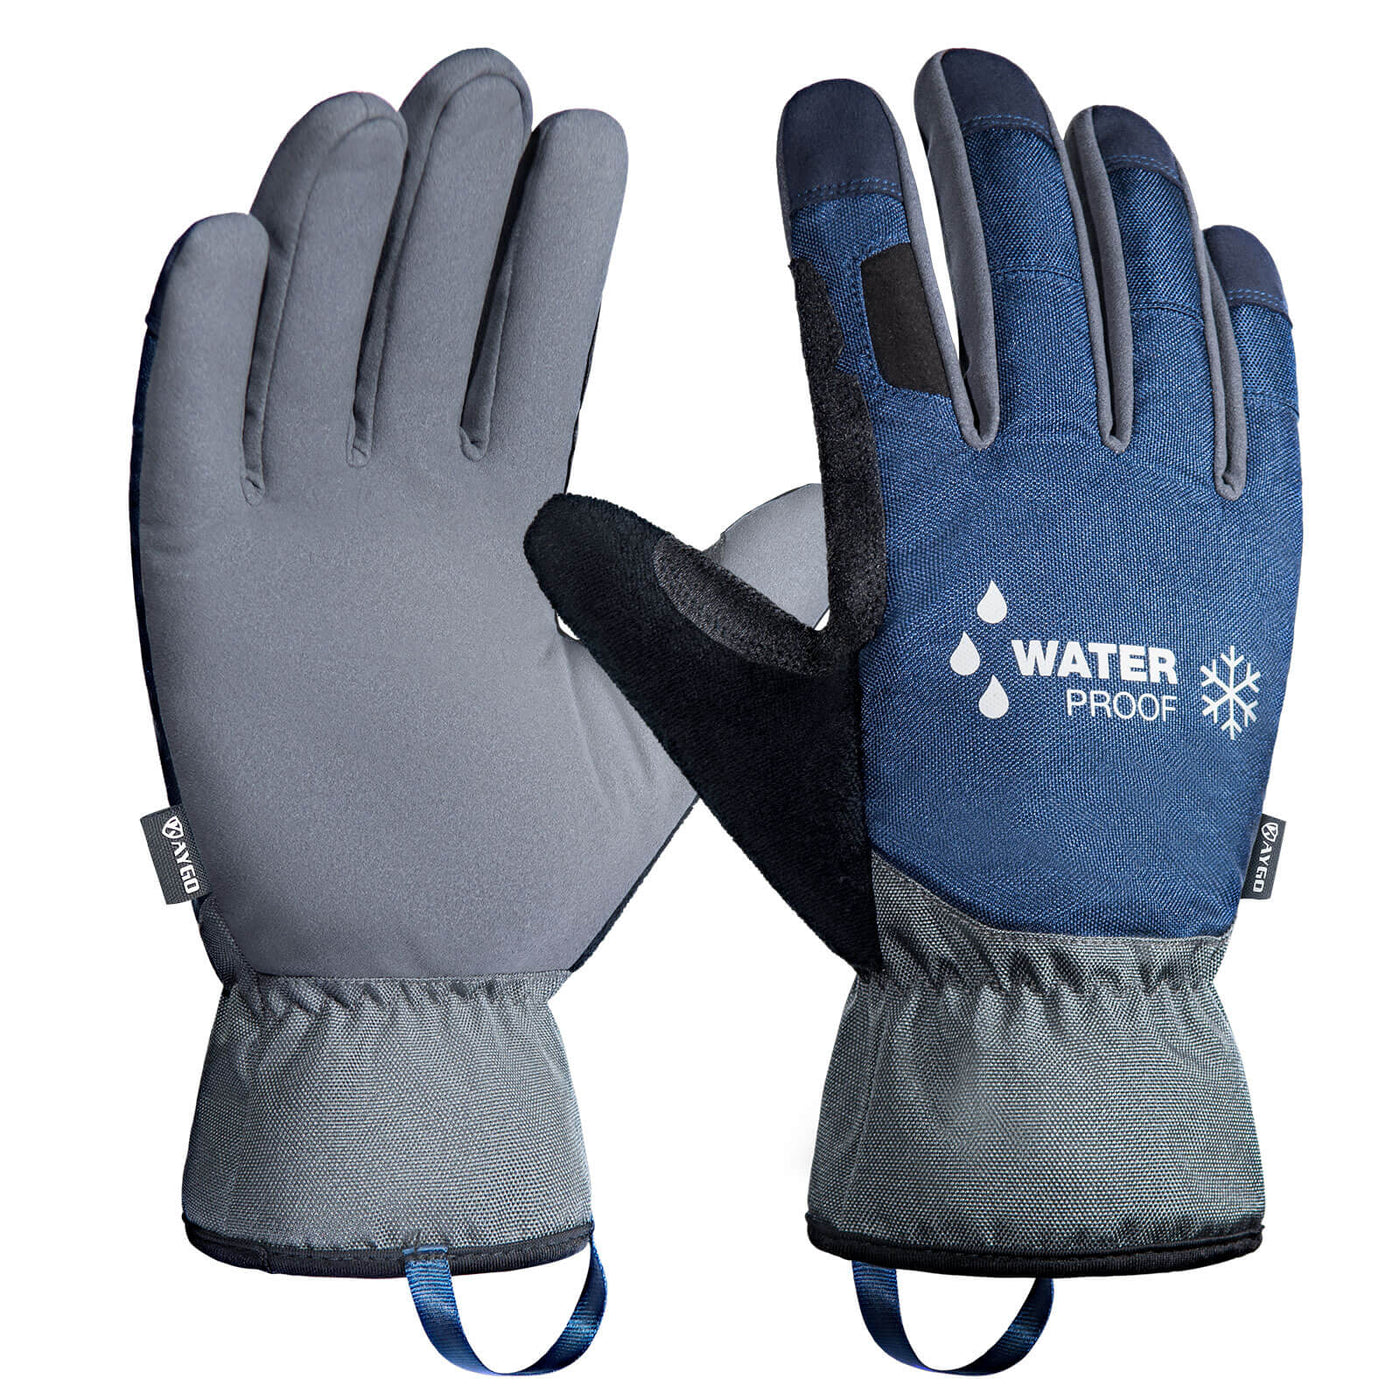 KAYGO Winter Insulated Mechanic Work Gloves KG126W,Double Lining,Improved  dexterity,Excellent Grip,Heavy duty, Utility Work Gloves for cars and